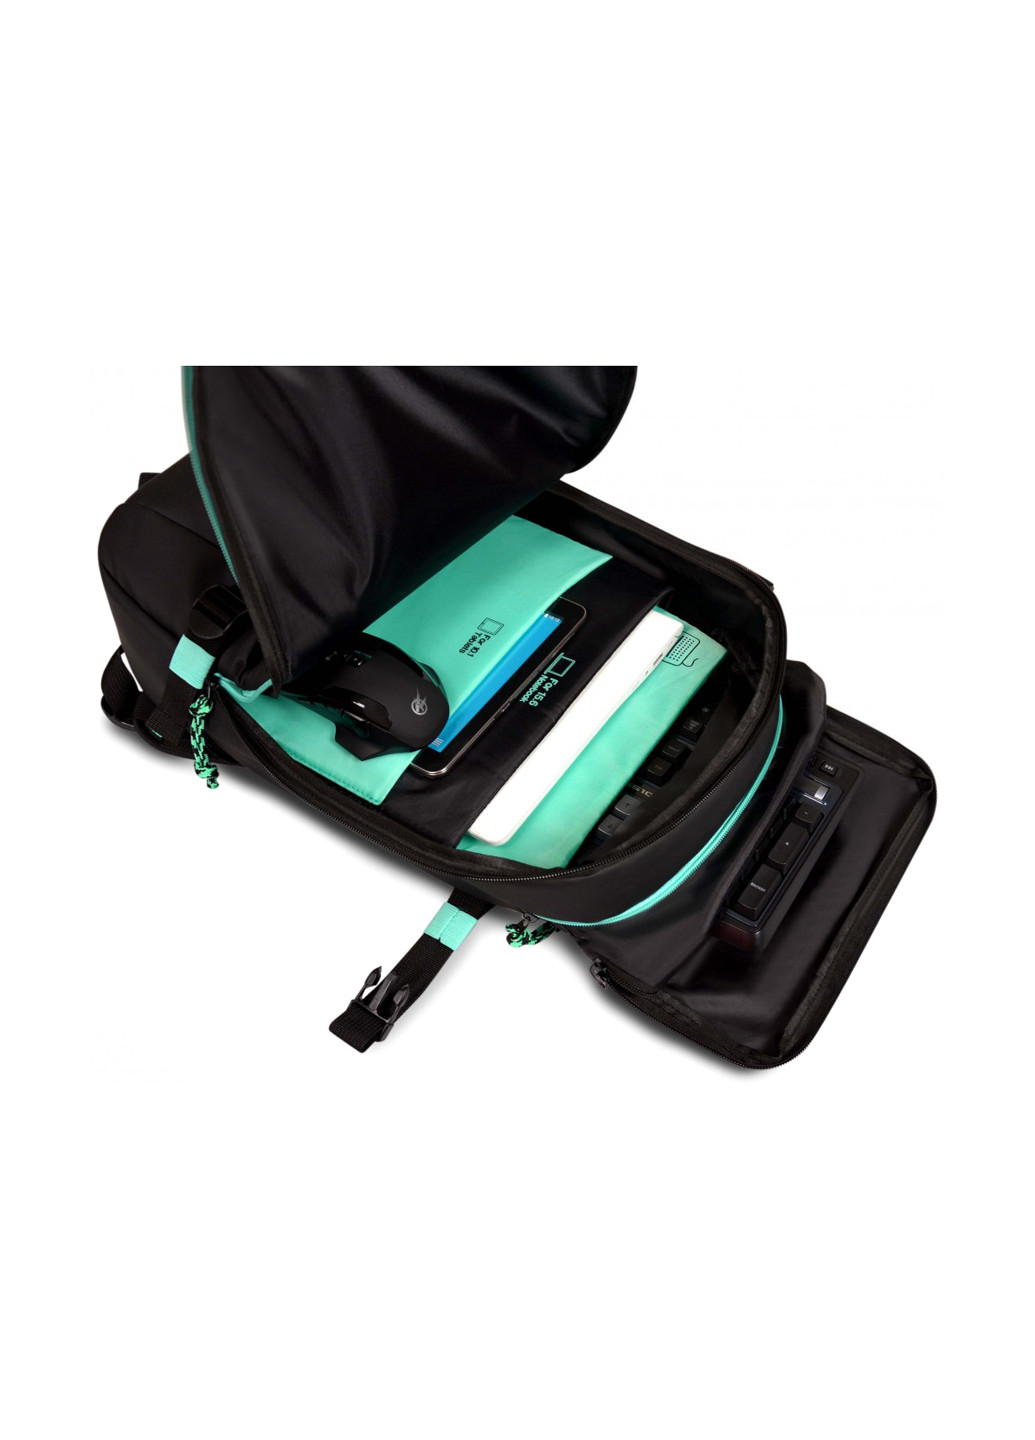 Рюкзак для ноутбука GAMING BackPack + Mouse Green Port Designs gaming backpack+mouse green (137229807)